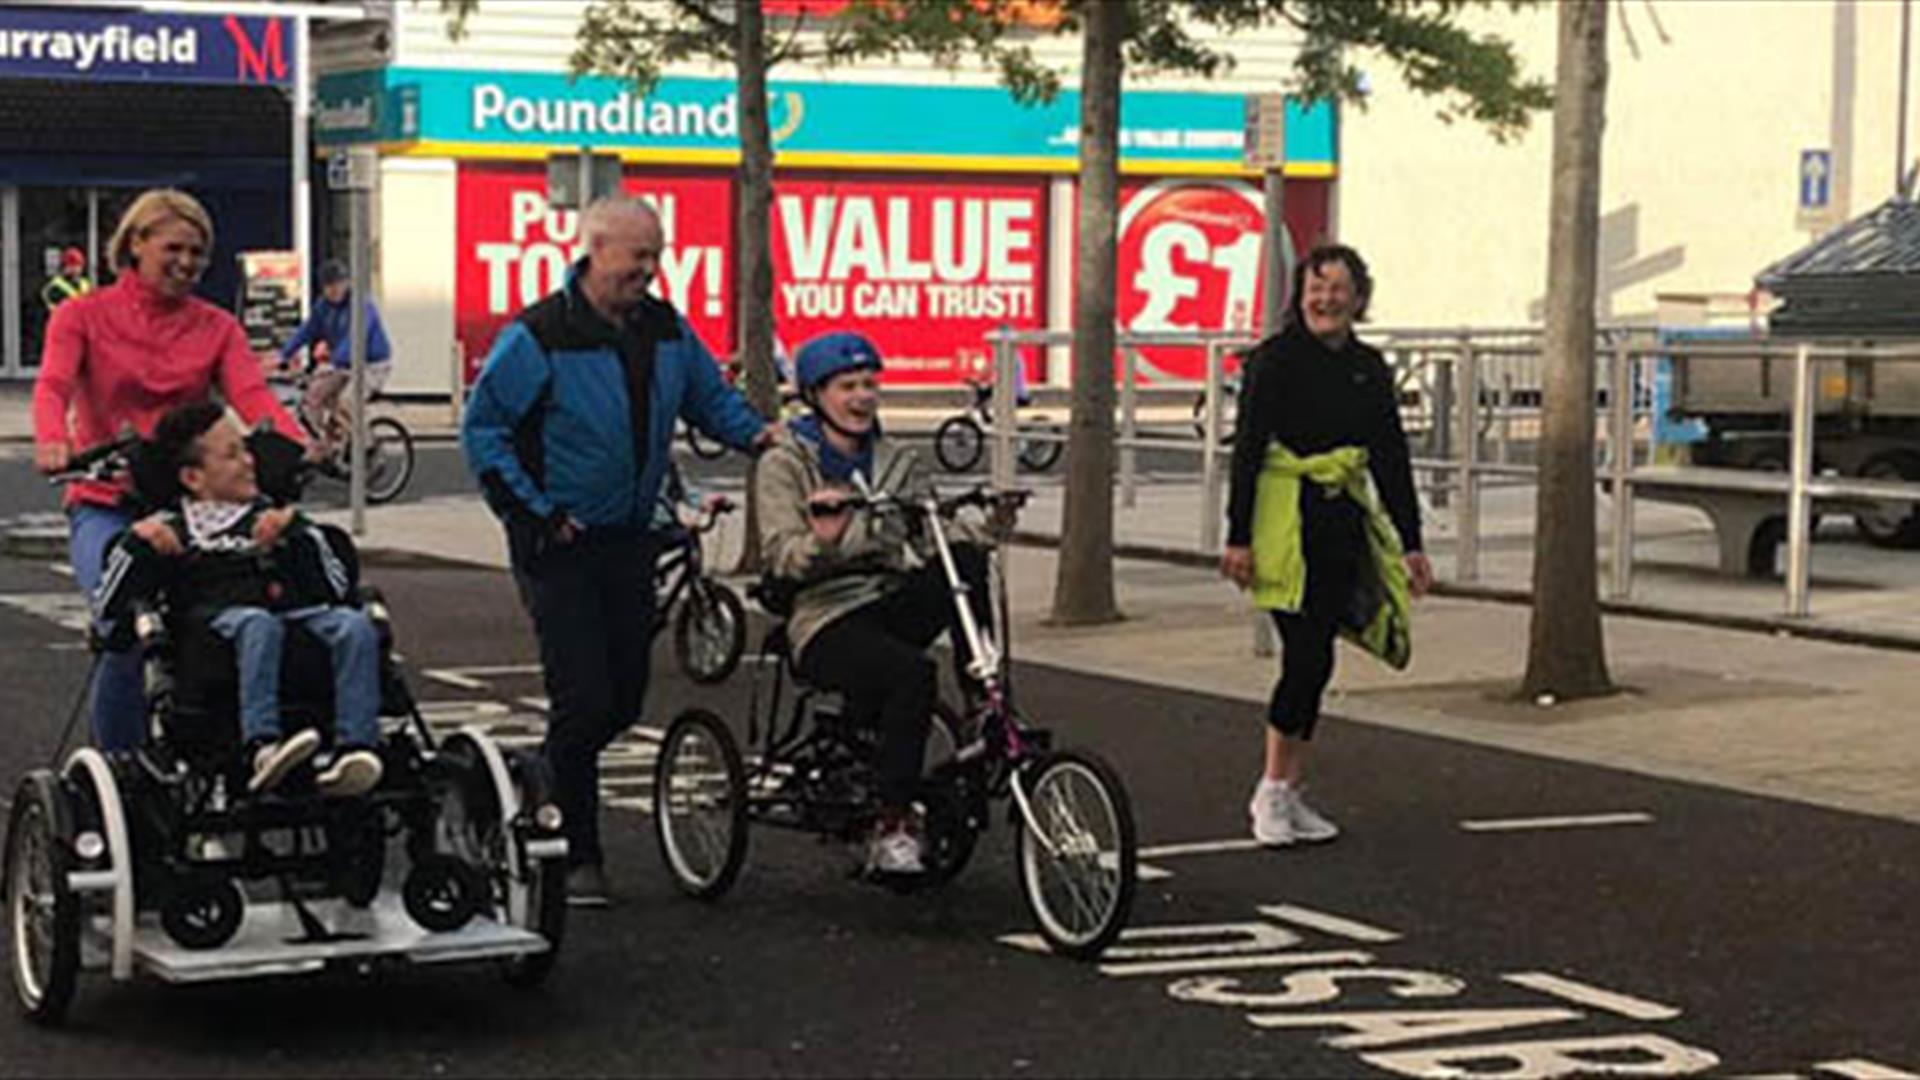 People on the street and young people using adapted bikes